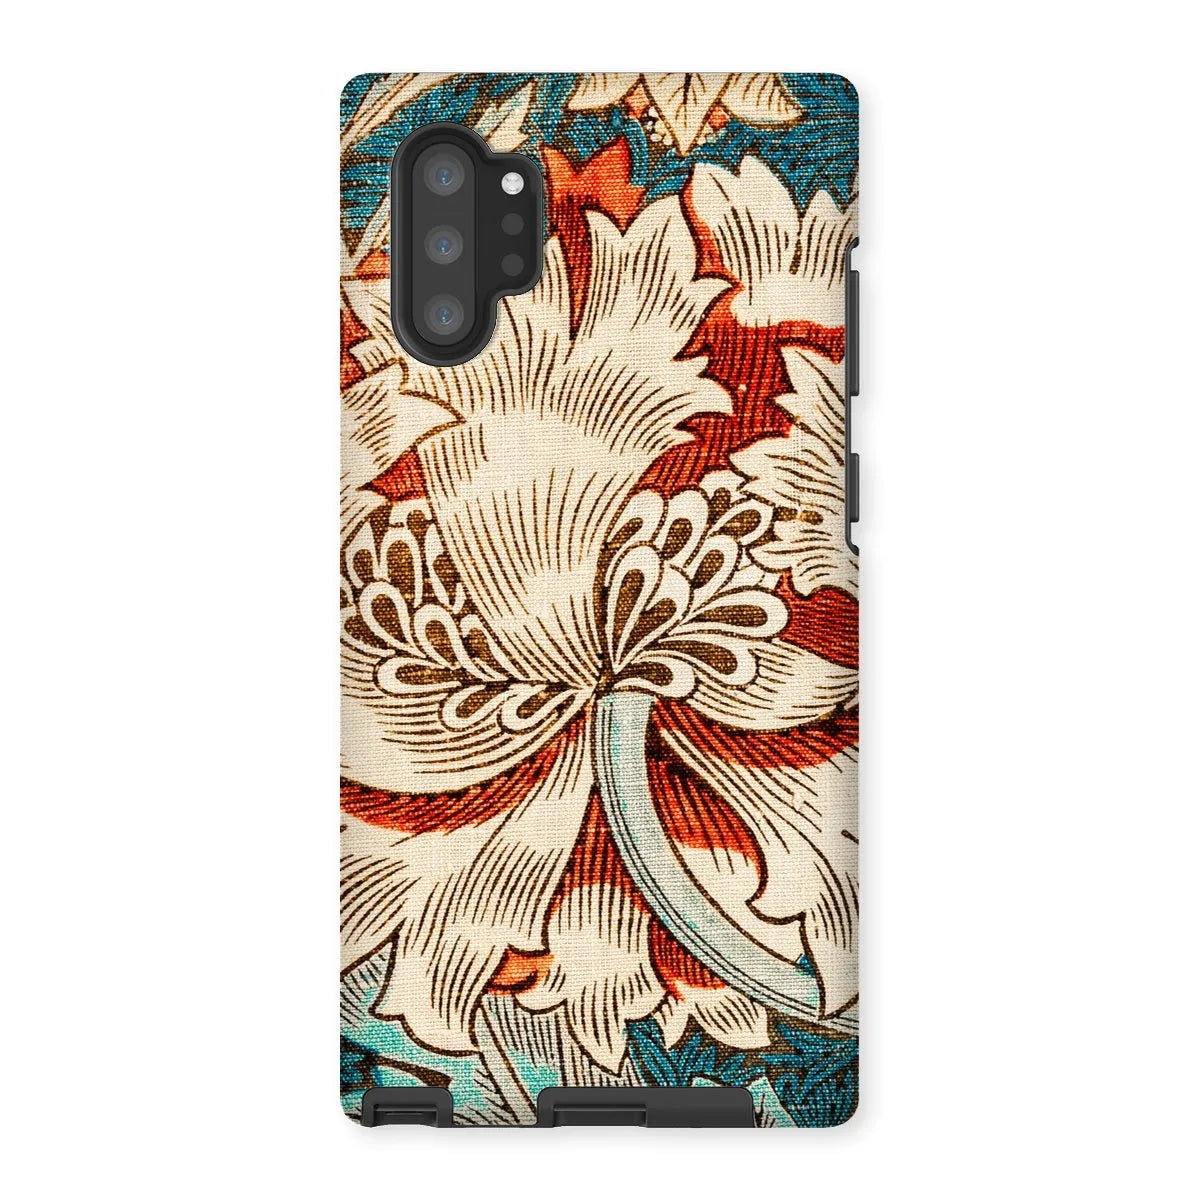 Honeysuckle Too By William Morris Phone Case - Samsung Galaxy Note 10p / Matte - Mobile Phone Cases - Aesthetic Art